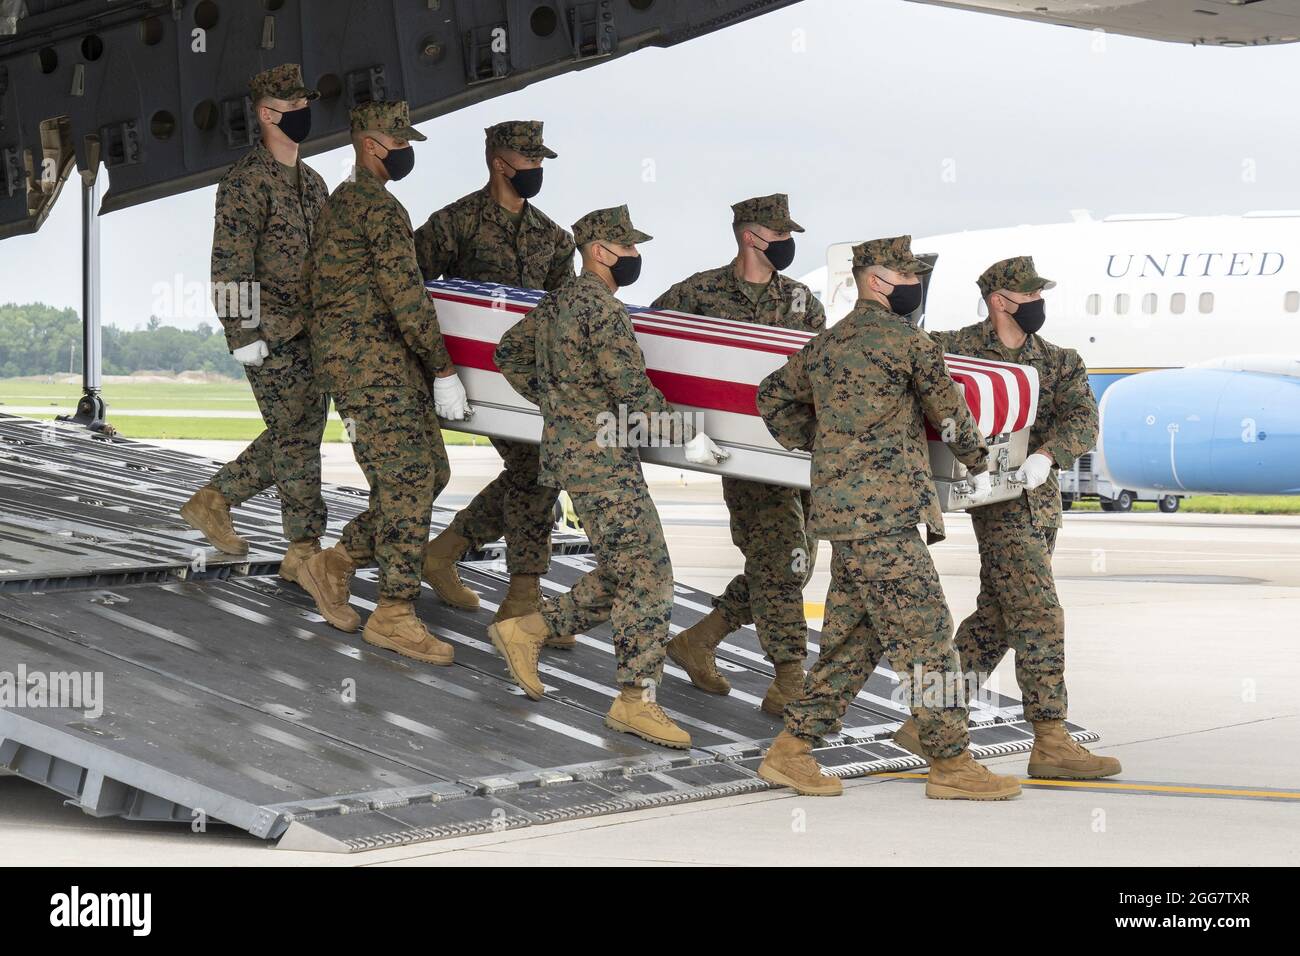 A U.S. Marine Corps carry team transfers the remains of Marine Corps Lance Cpl. Dylan R. Merola of Rancho Cucamonga, California, on August 29, 2021, at Dover Air Force Base, Delaware. Merola, who was killed in a suicide bombing outside the Kabul airport on Thursday, August 26, was assigned to 2nd Battalion, 1st Marine Regiment, 1st Marine Division, I Marine Expeditionary Force, Camp Pendleton, California. Photo by Jason Minto/U.S. Air Force/UPI Credit: UPI/Alamy Live News Stock Photo